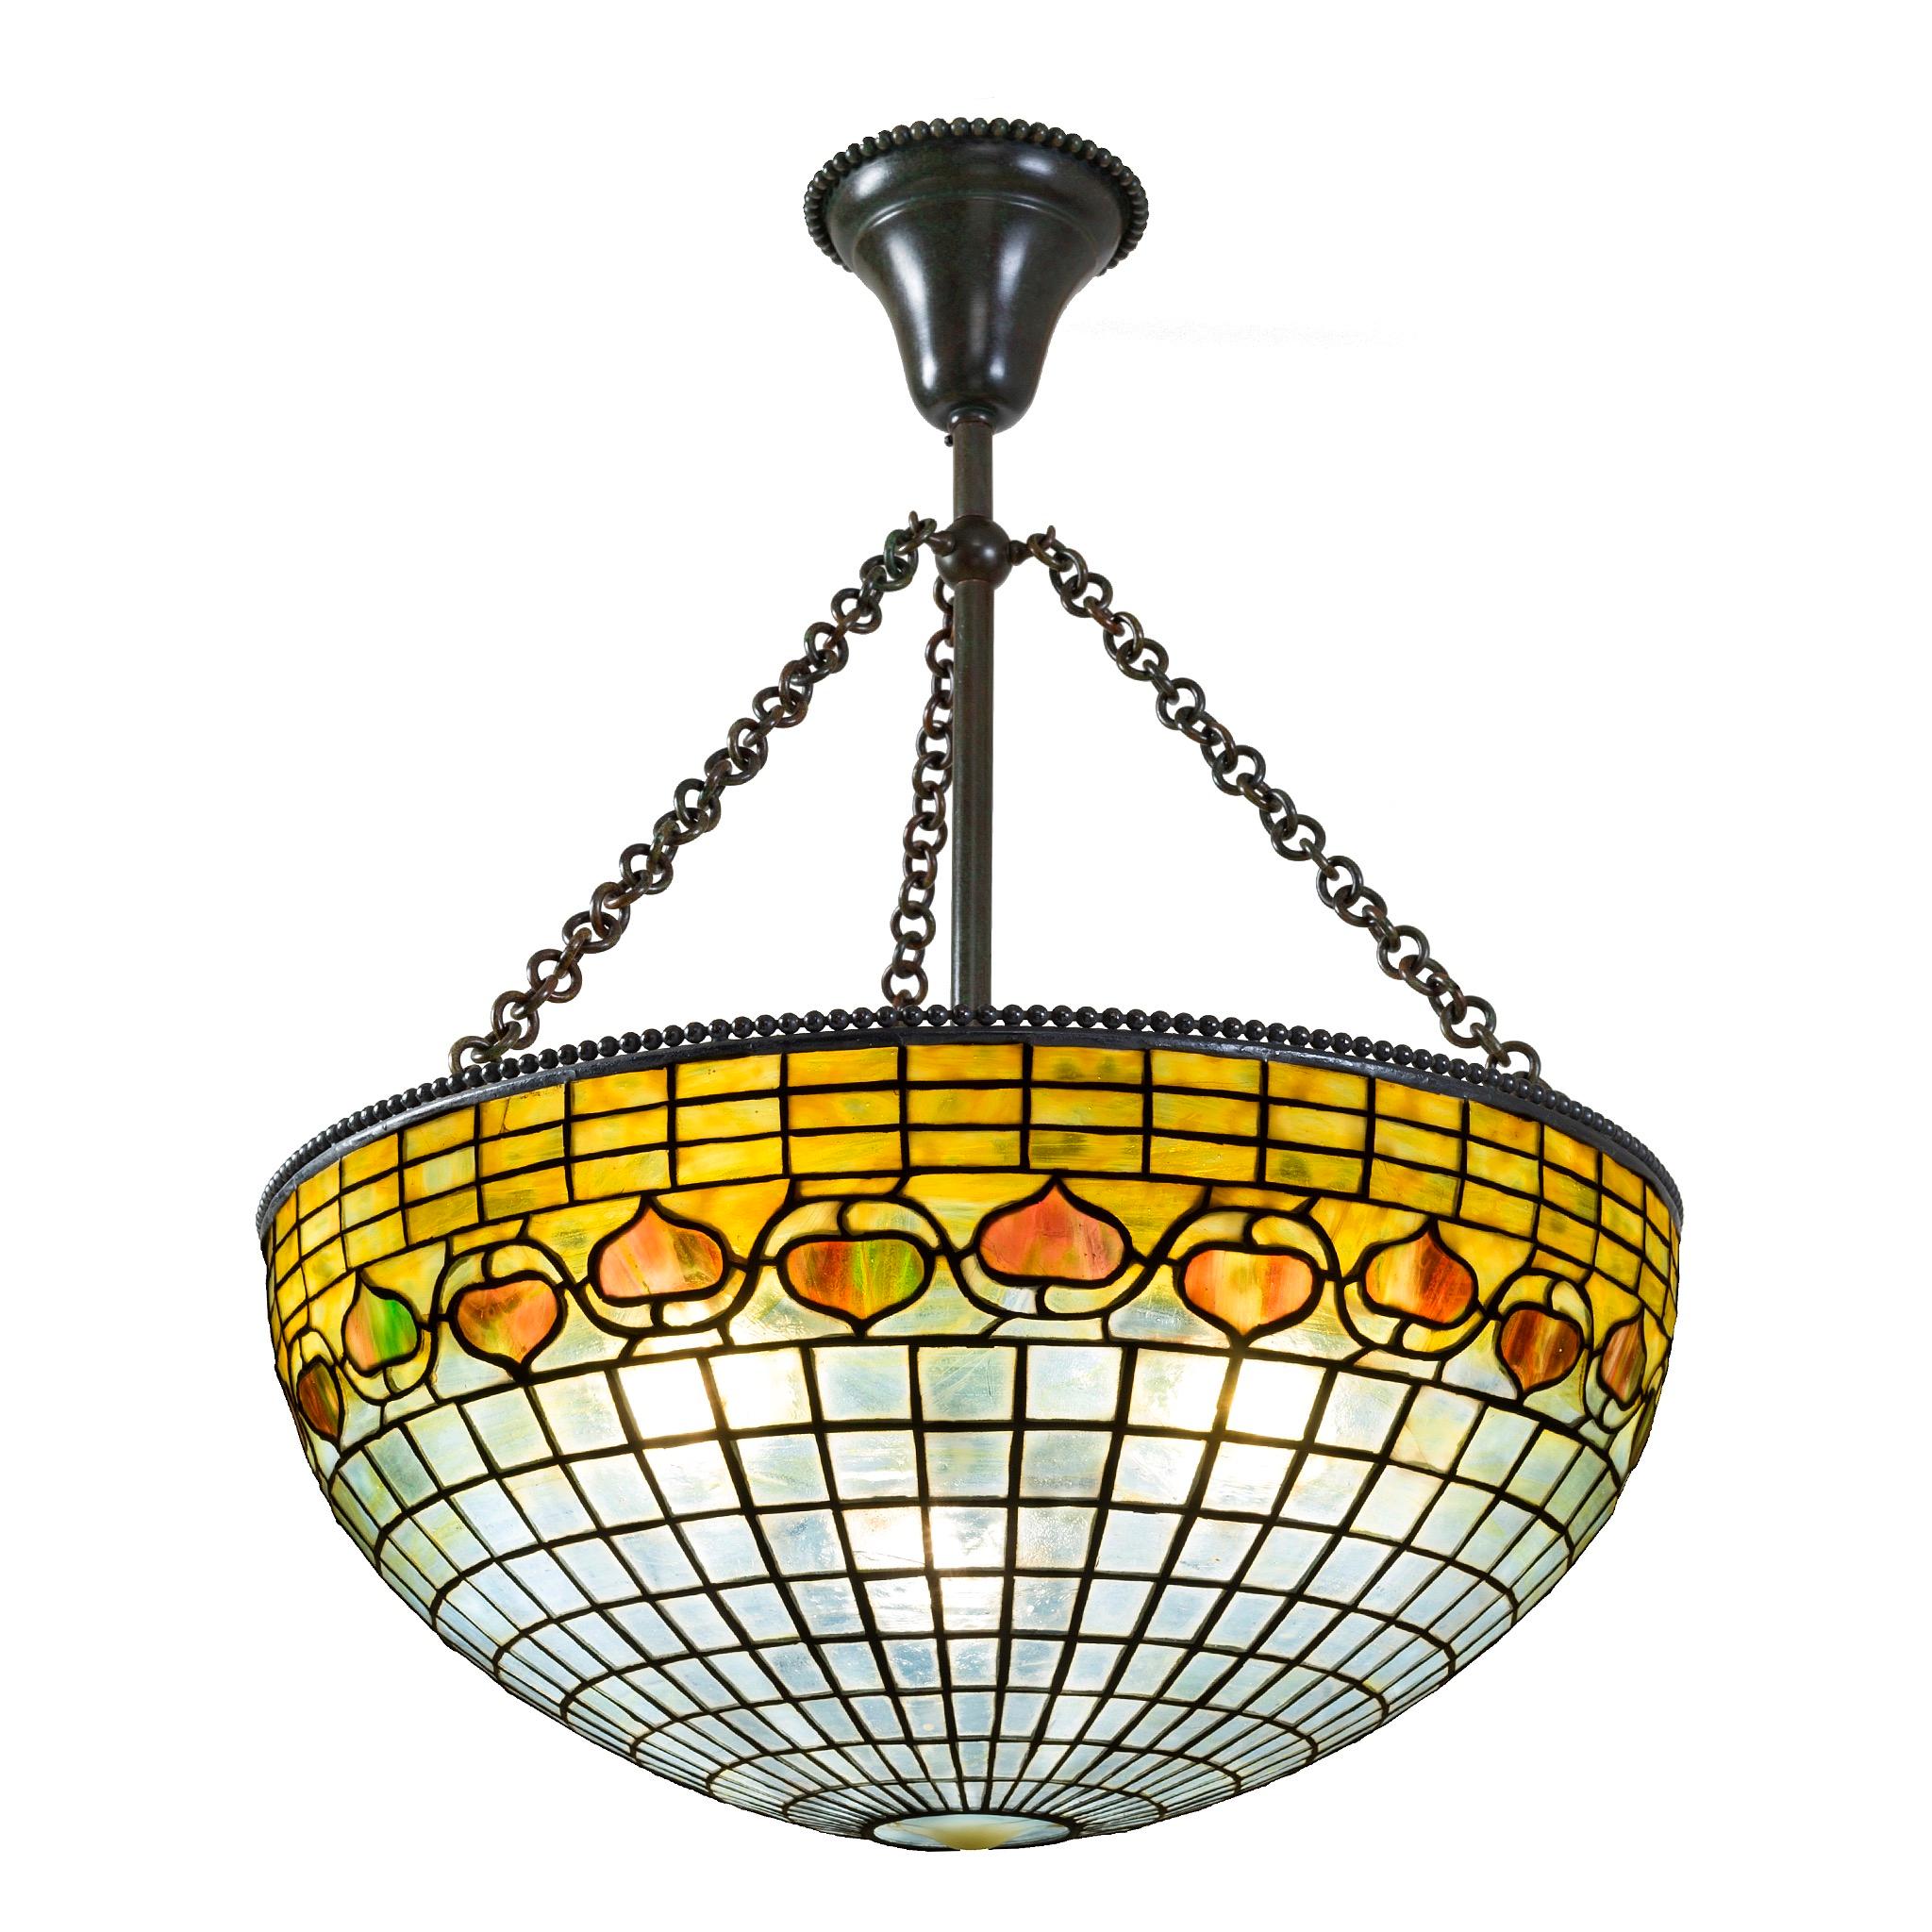 A subtly-colored, full-bodied chandelier from Tiffany Studios New York, decorated with an 